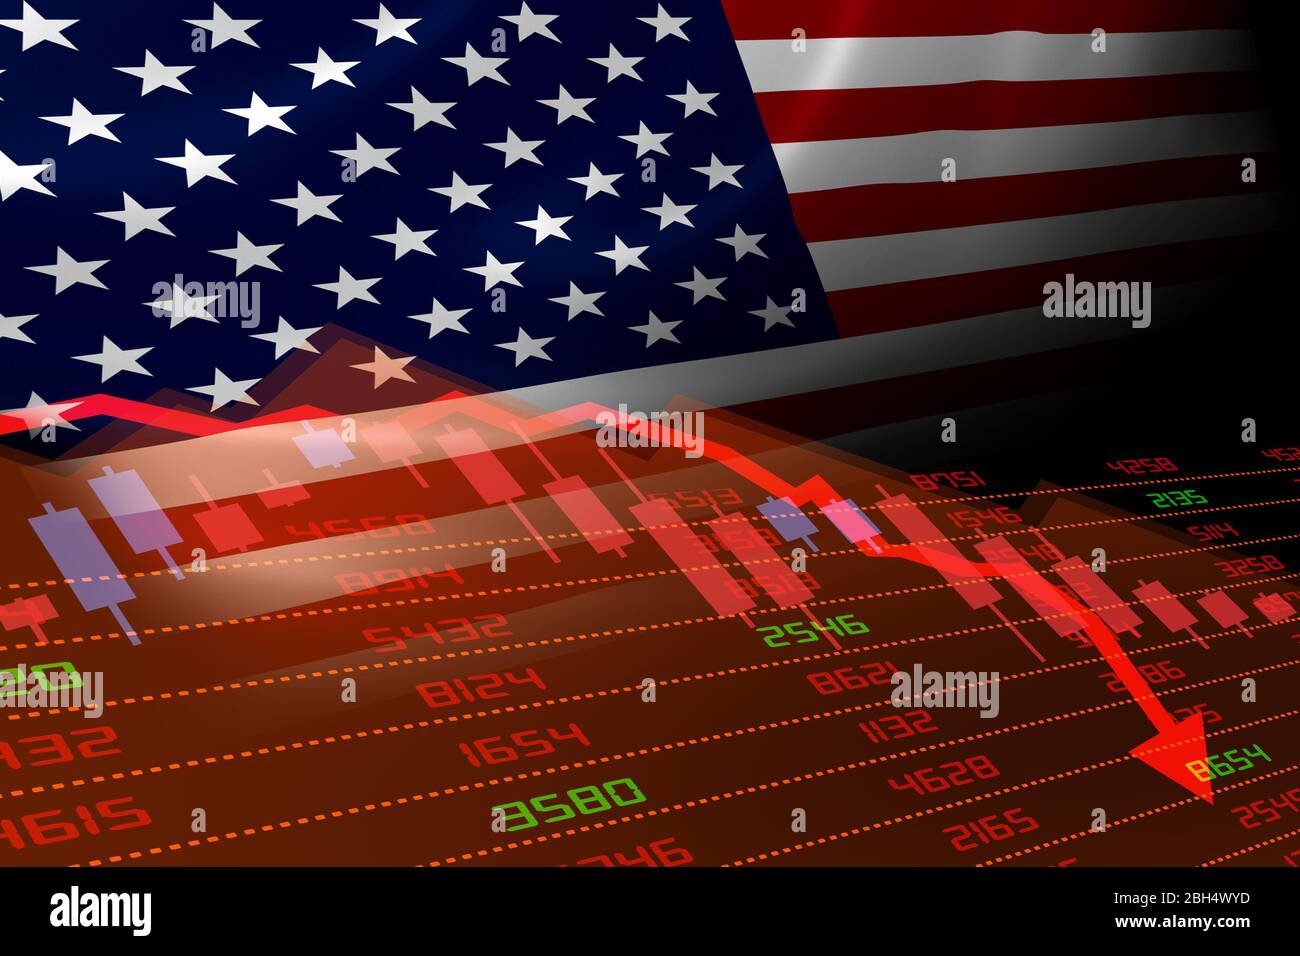 United States economic downturn with stock exchange market showing stock chart down and in red negative territory. Business and financial money market Stock Photo